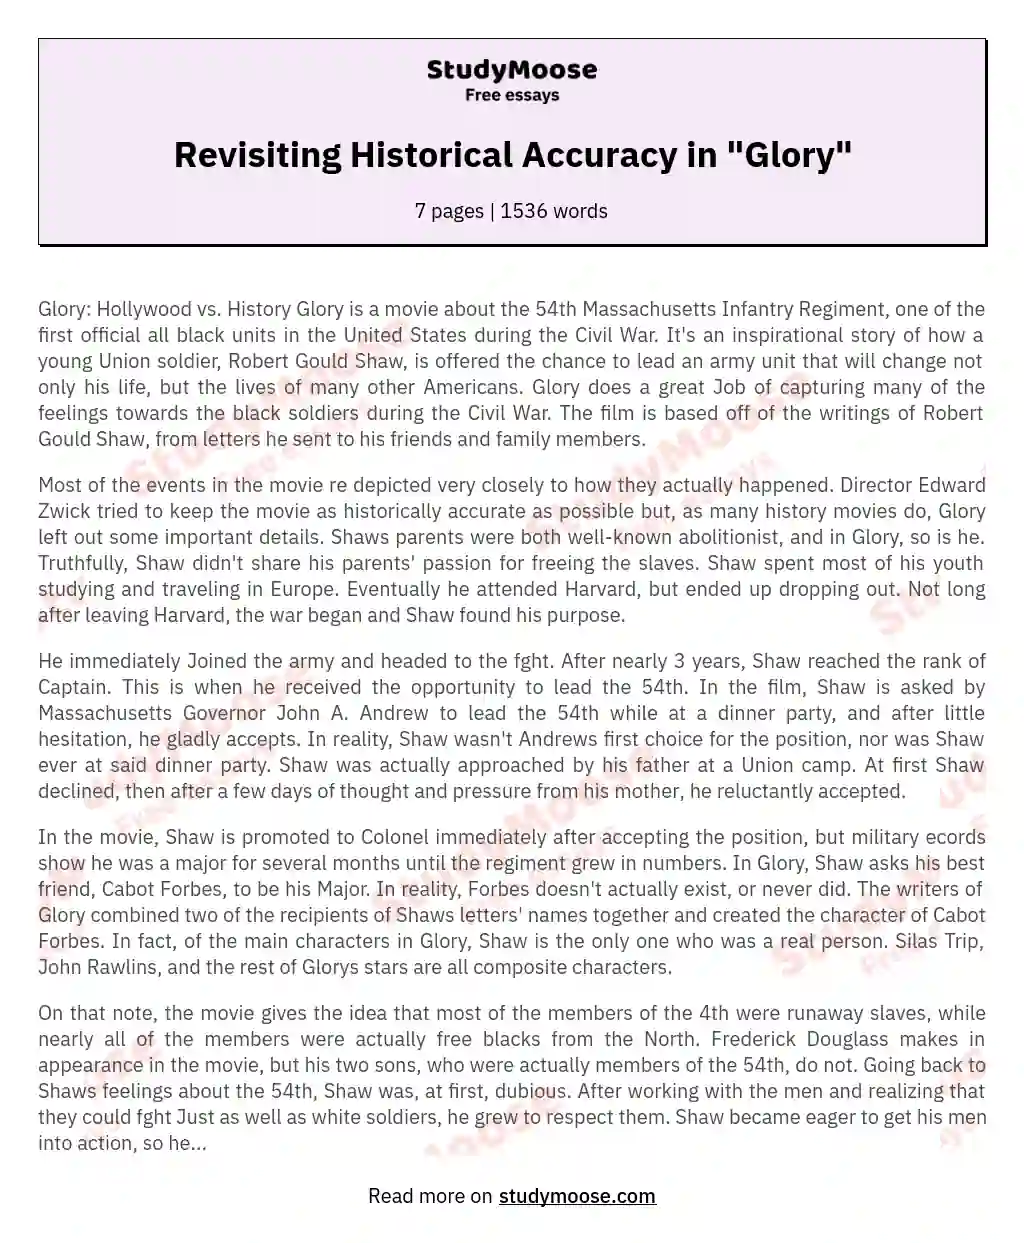 Revisiting Historical Accuracy in "Glory" essay